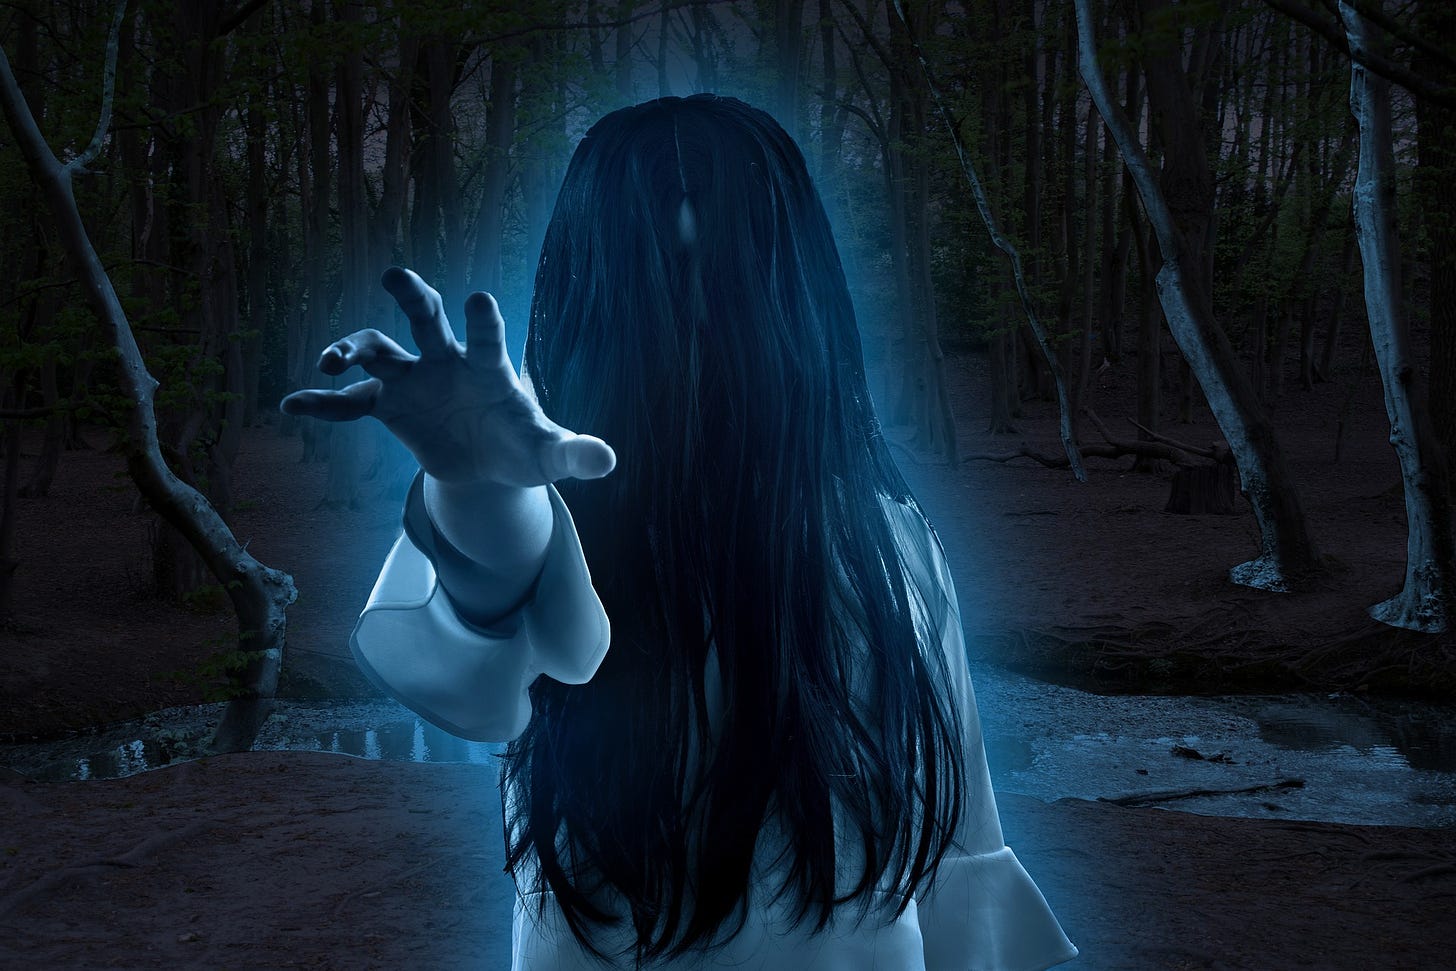 Scary woman in the woods at night. Her long hair covers her face and her arm is reached out as if to grab what's in front of her.